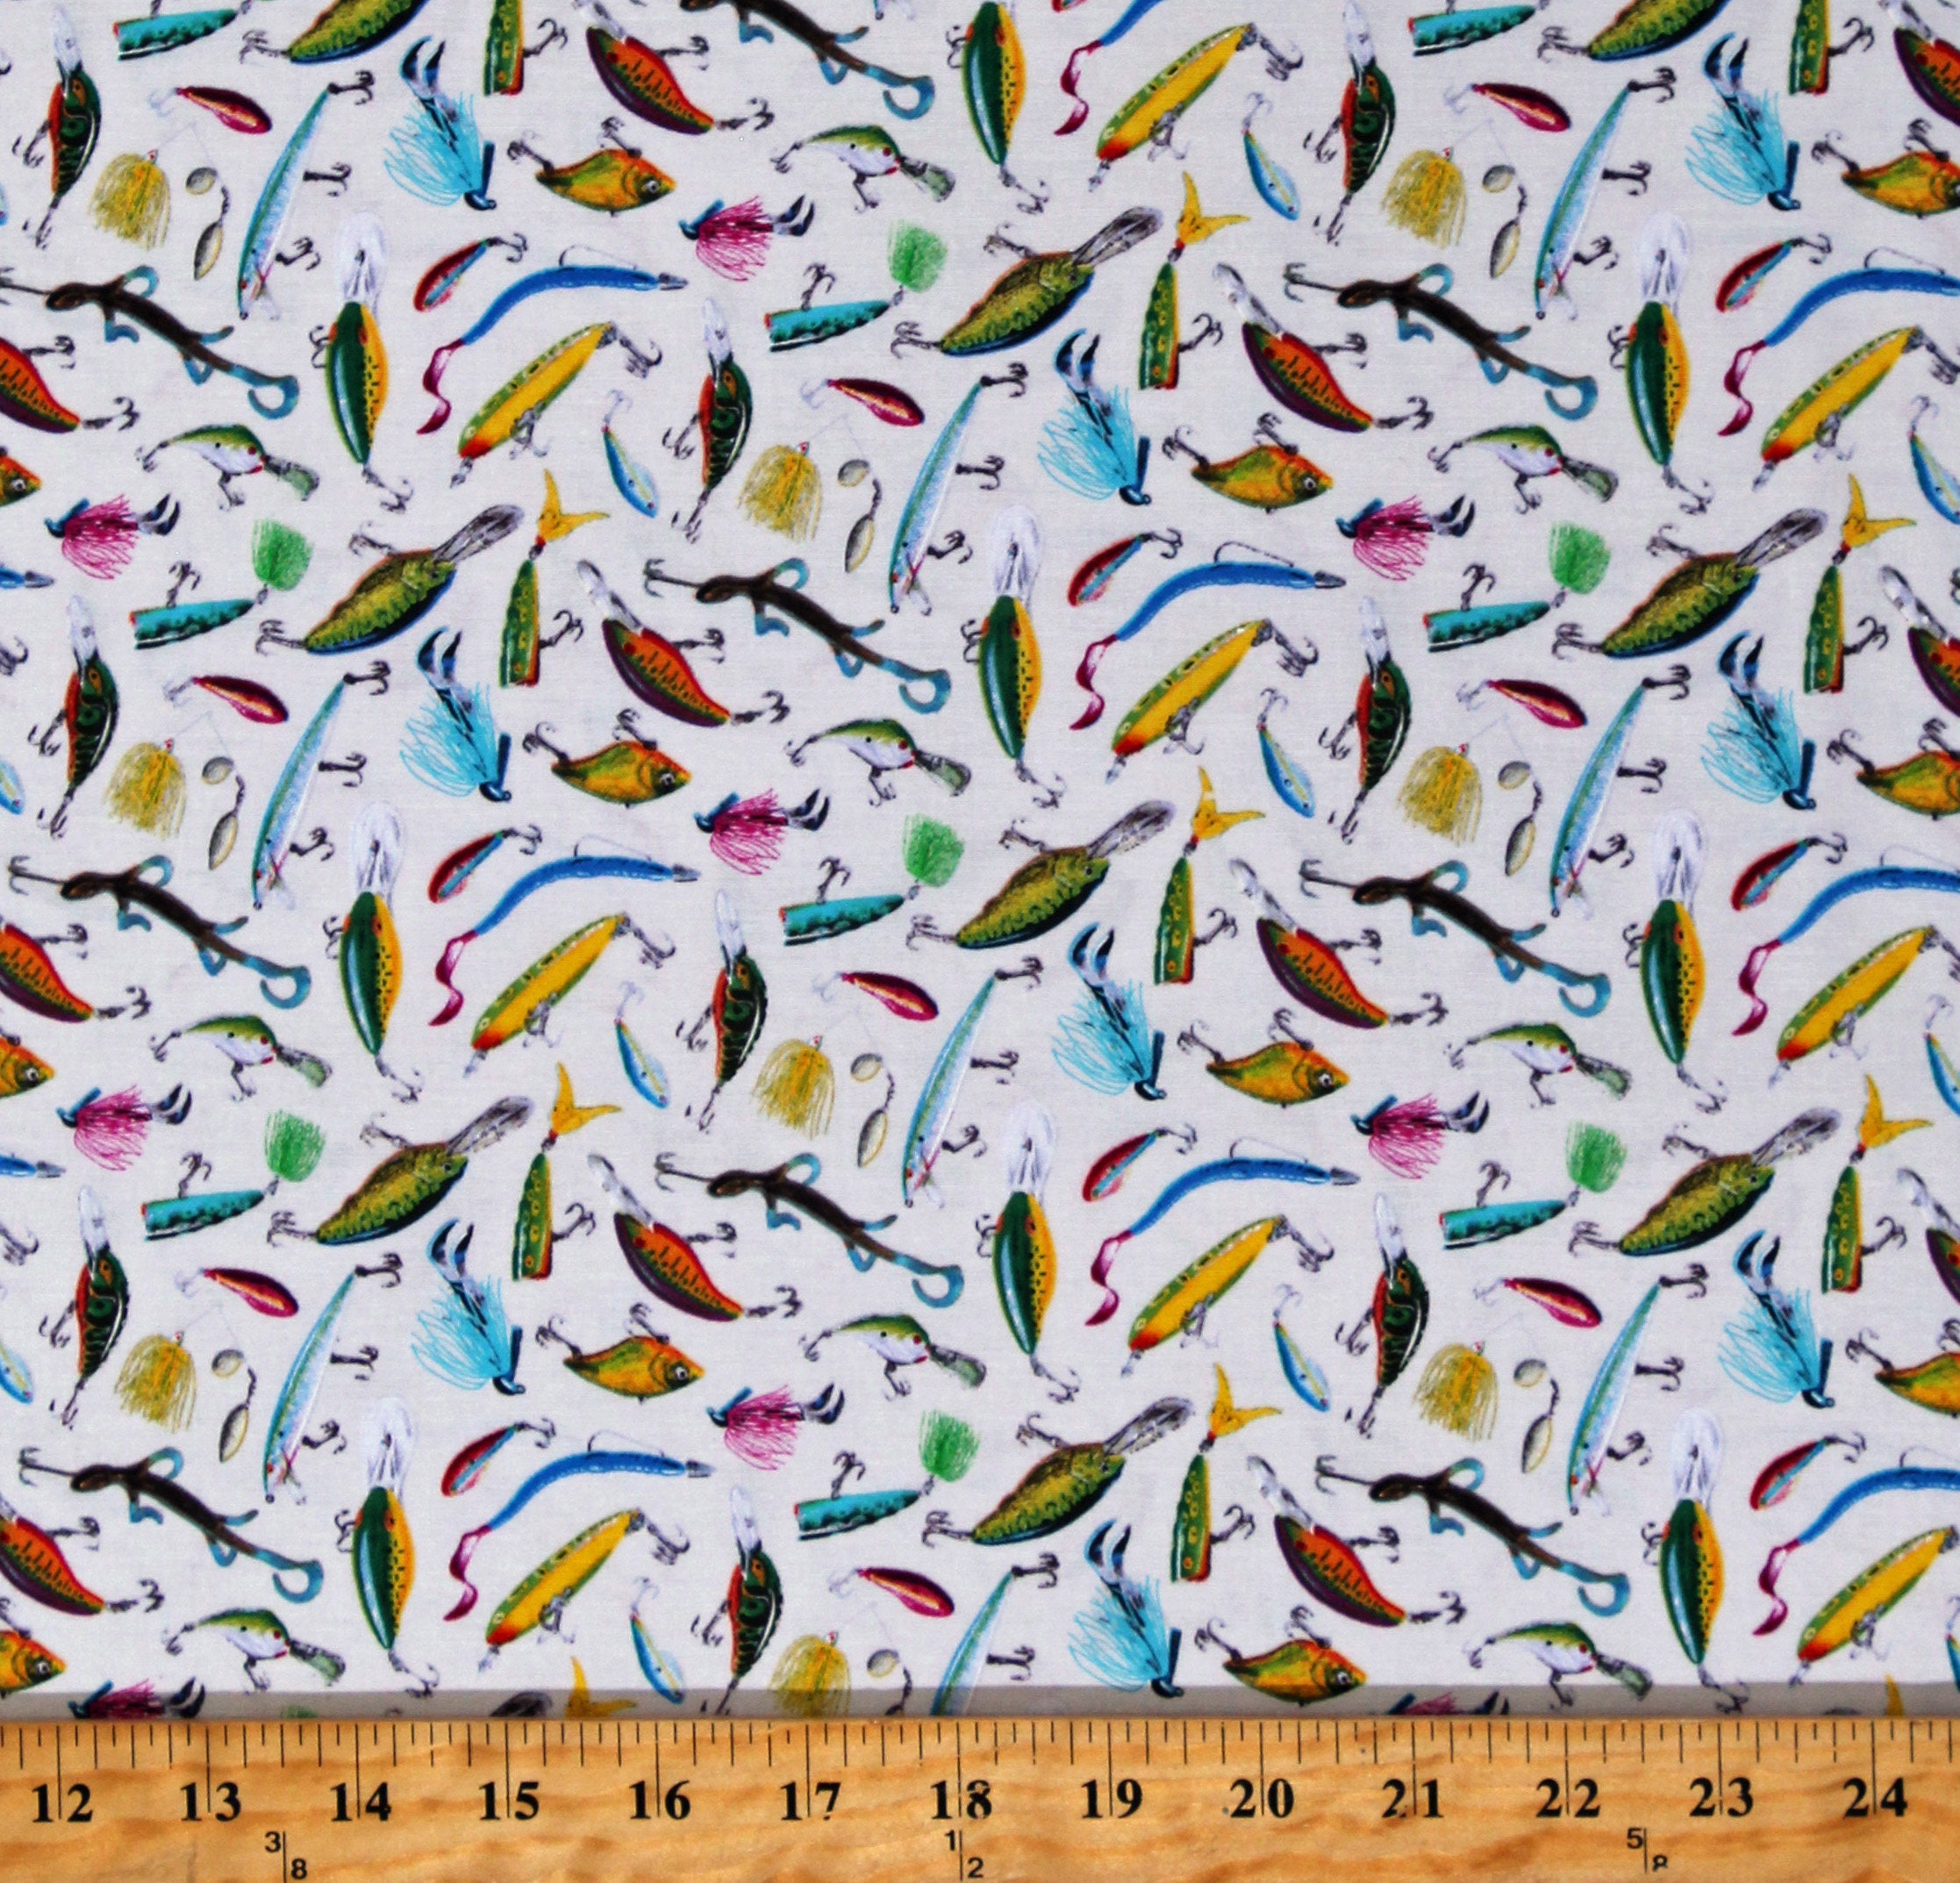 Cotton Fishing Lures Bait Hooks Top Rod Eggshell Fabric Print by Yard D682.77